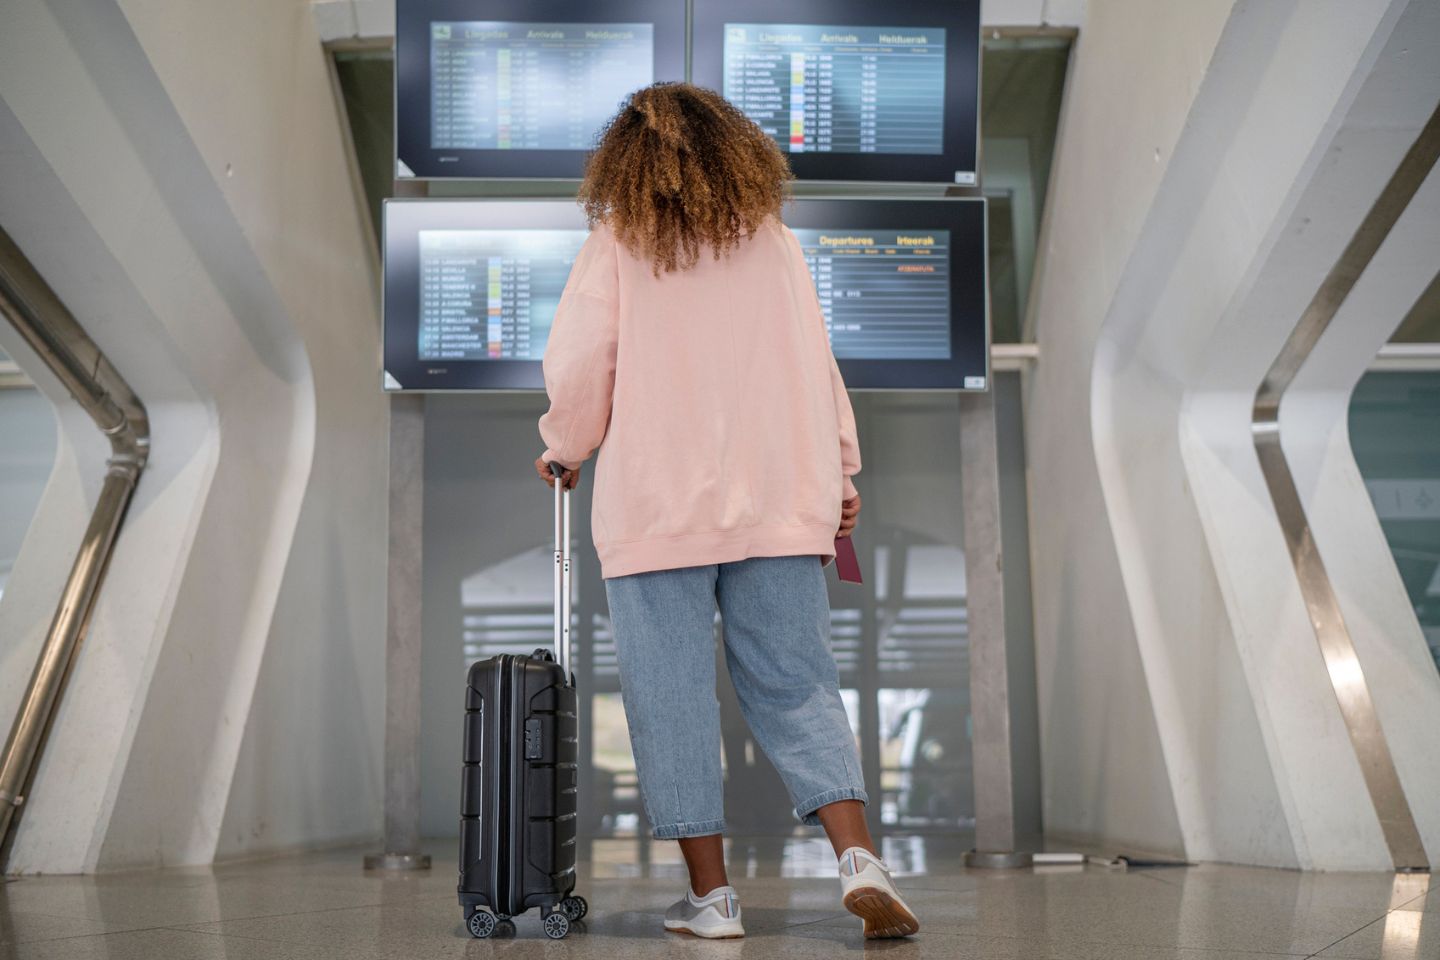 Black Woman in Cozy Sweater at Airport